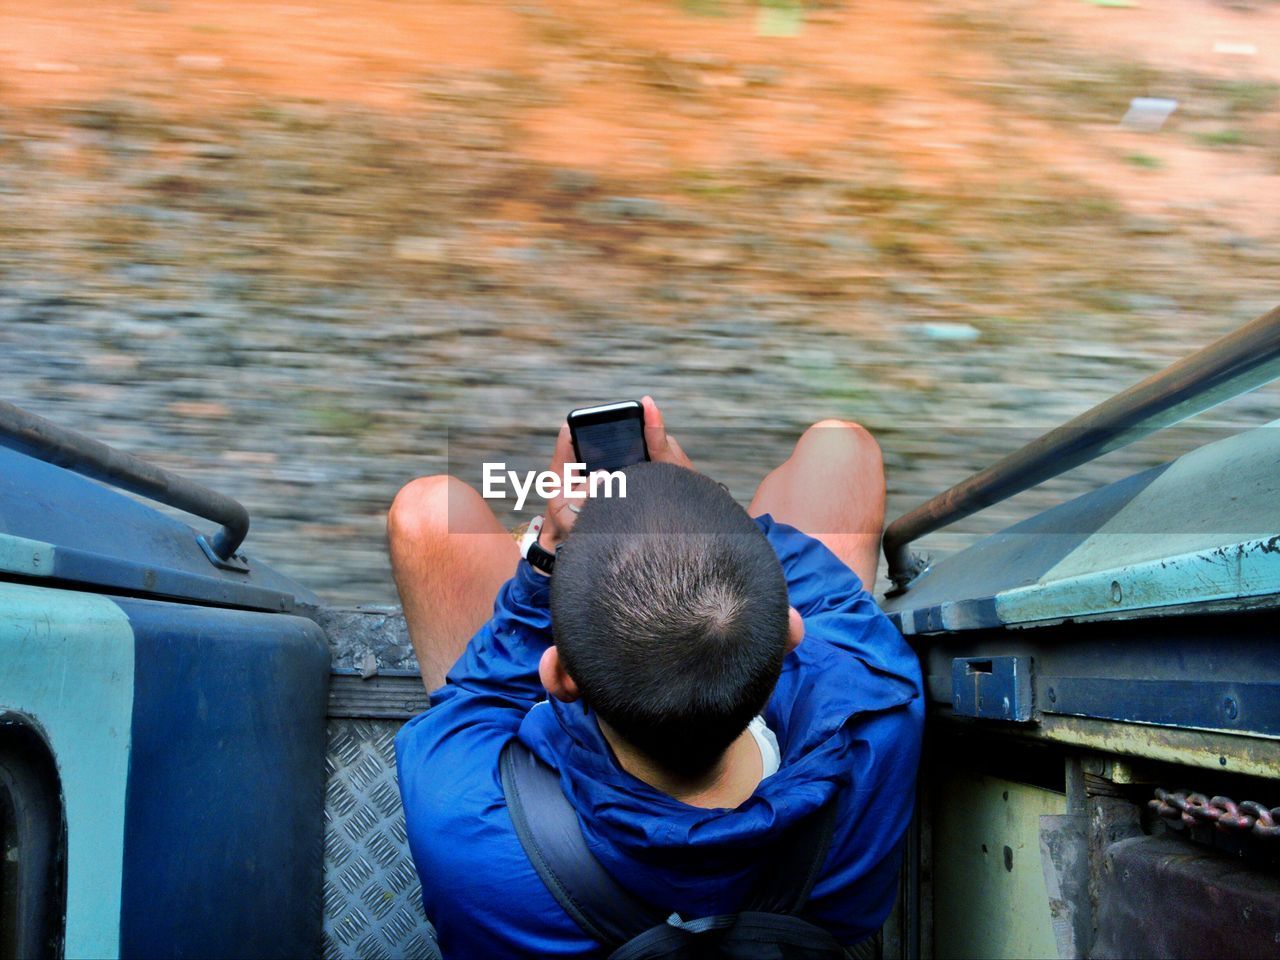 Directly above shot of boy using mobile phone at entrance of train